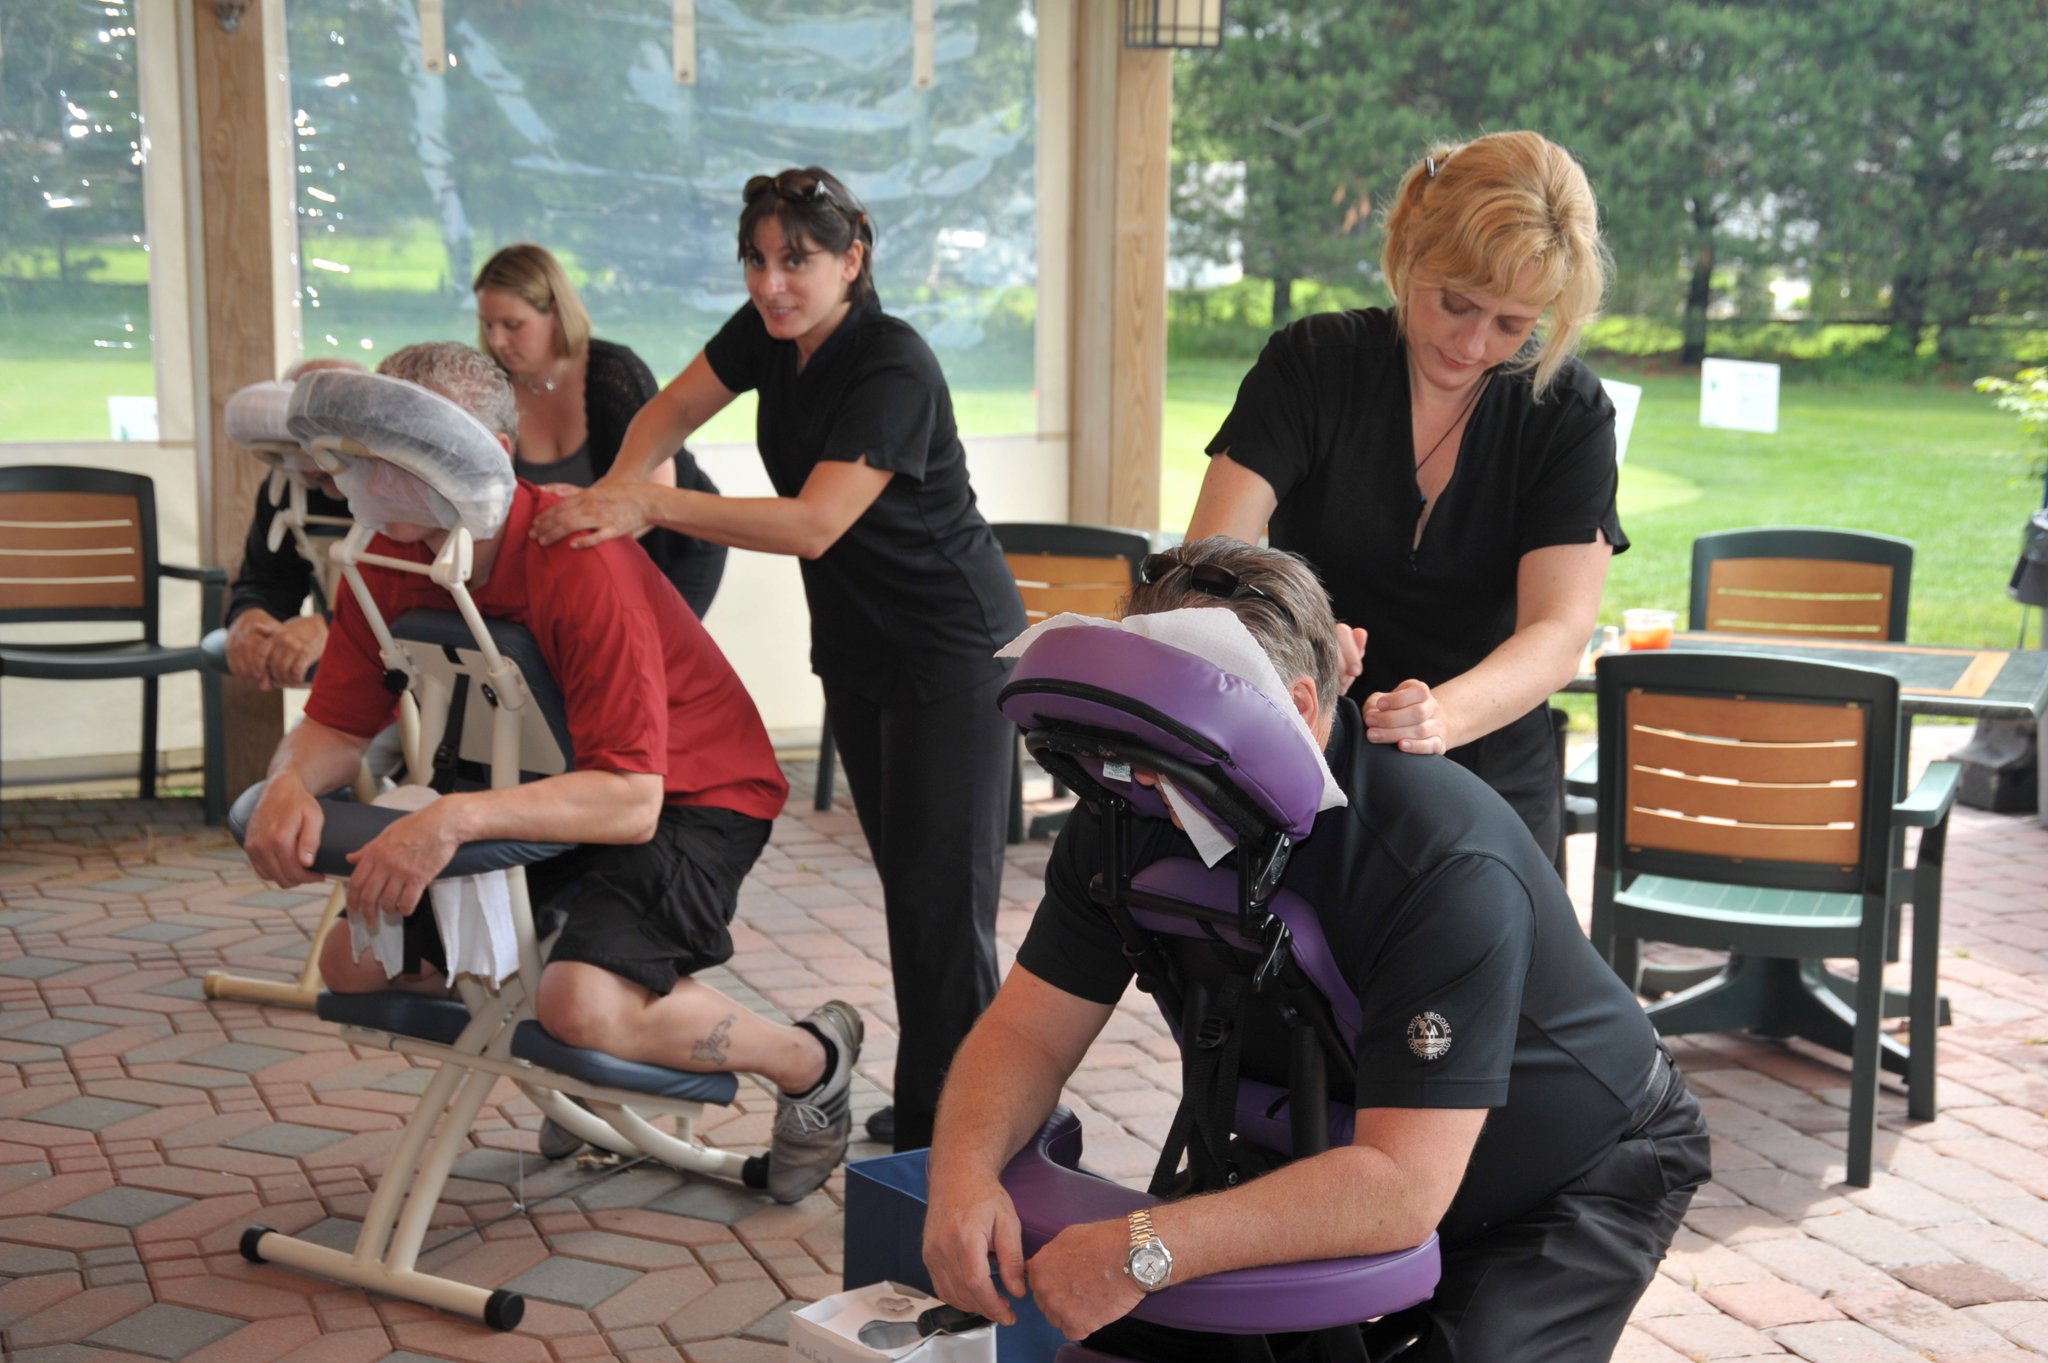 Chair massage services reduce stress and increase moral.